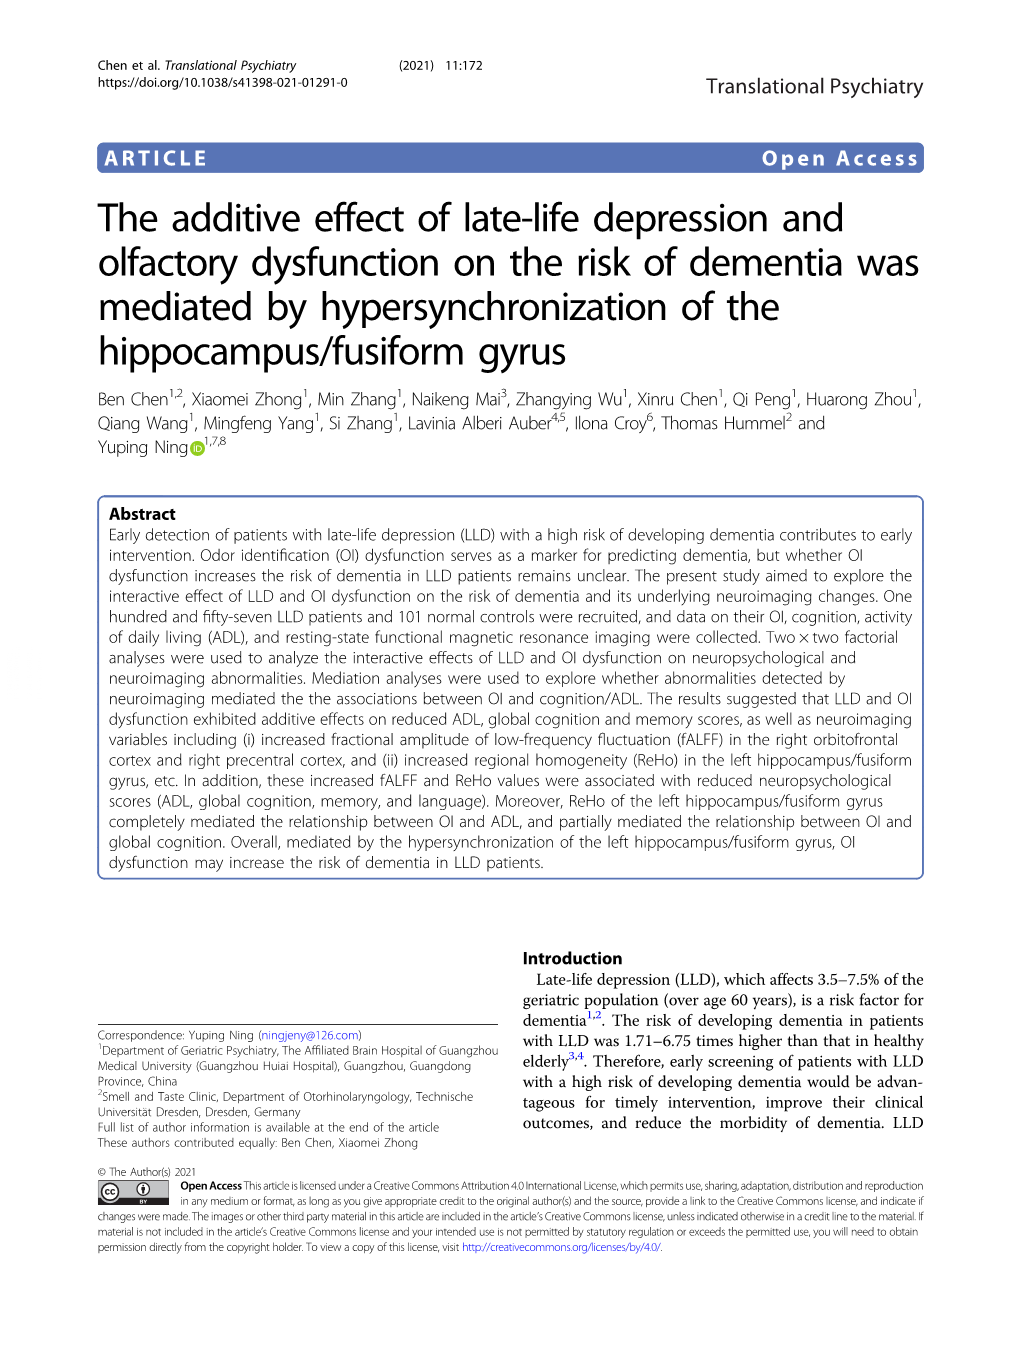 The Additive Effect of Late-Life Depression and Olfactory